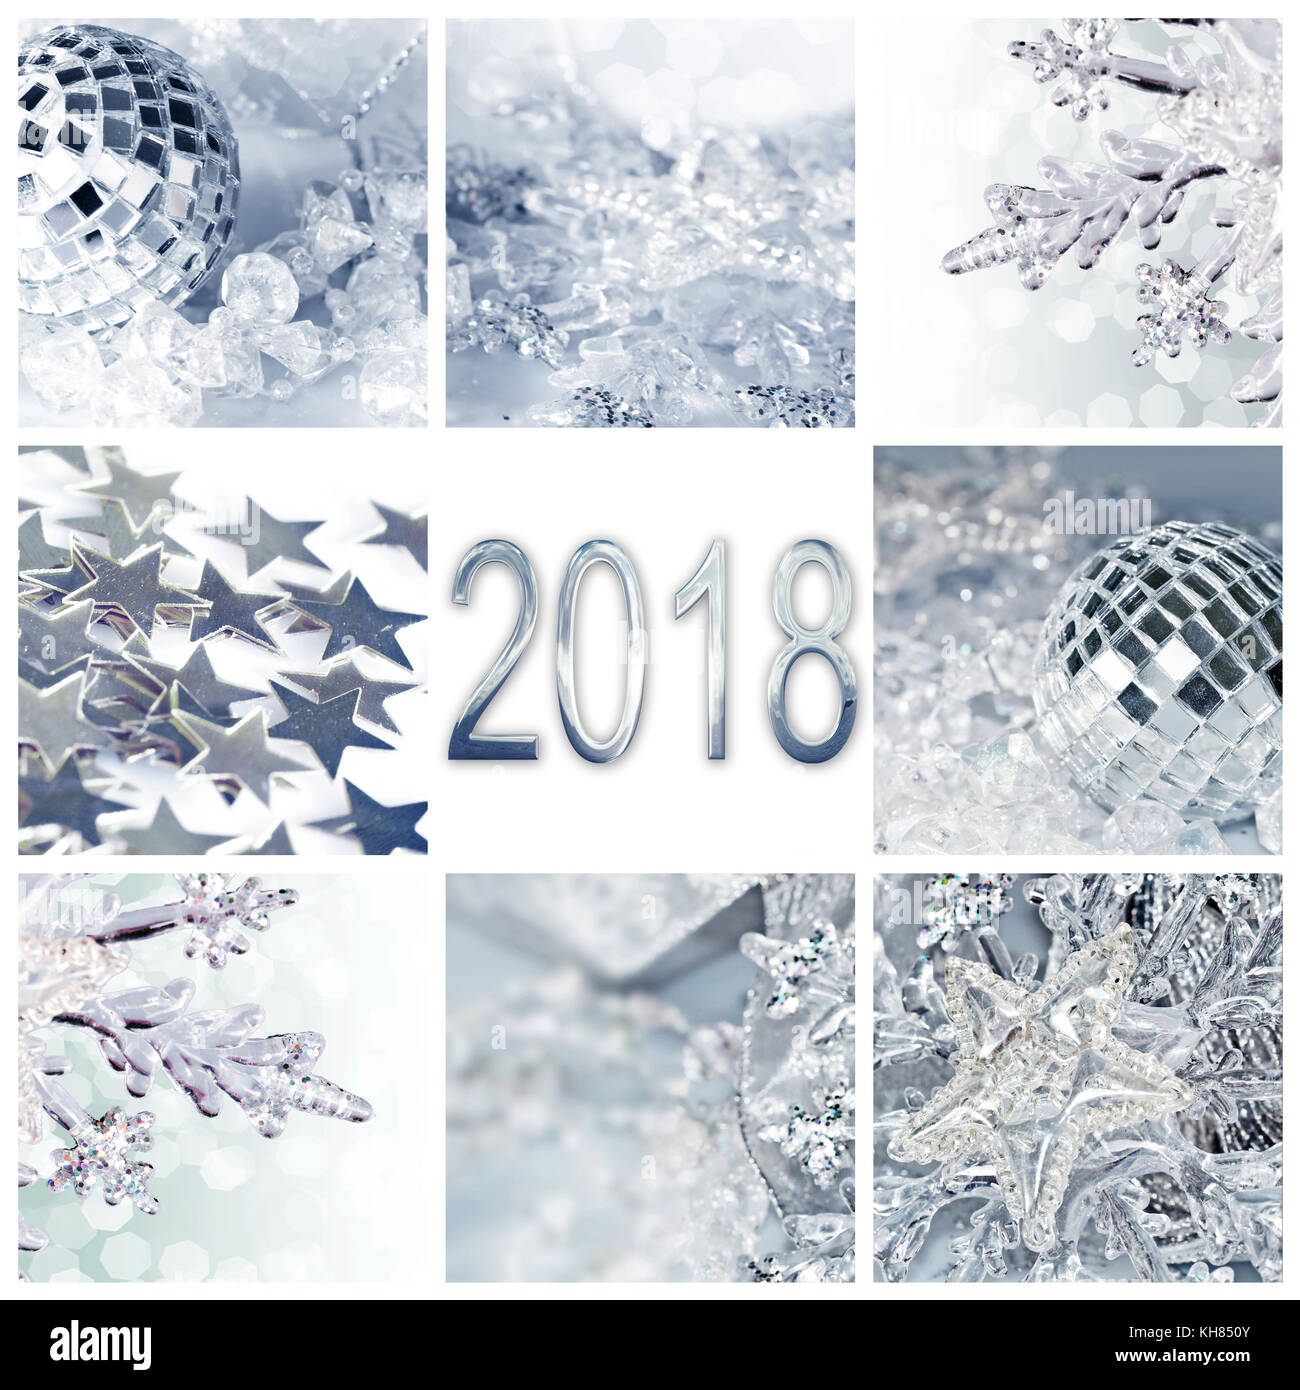 2018, silver christmas ornaments collage square greeting card Stock Photo